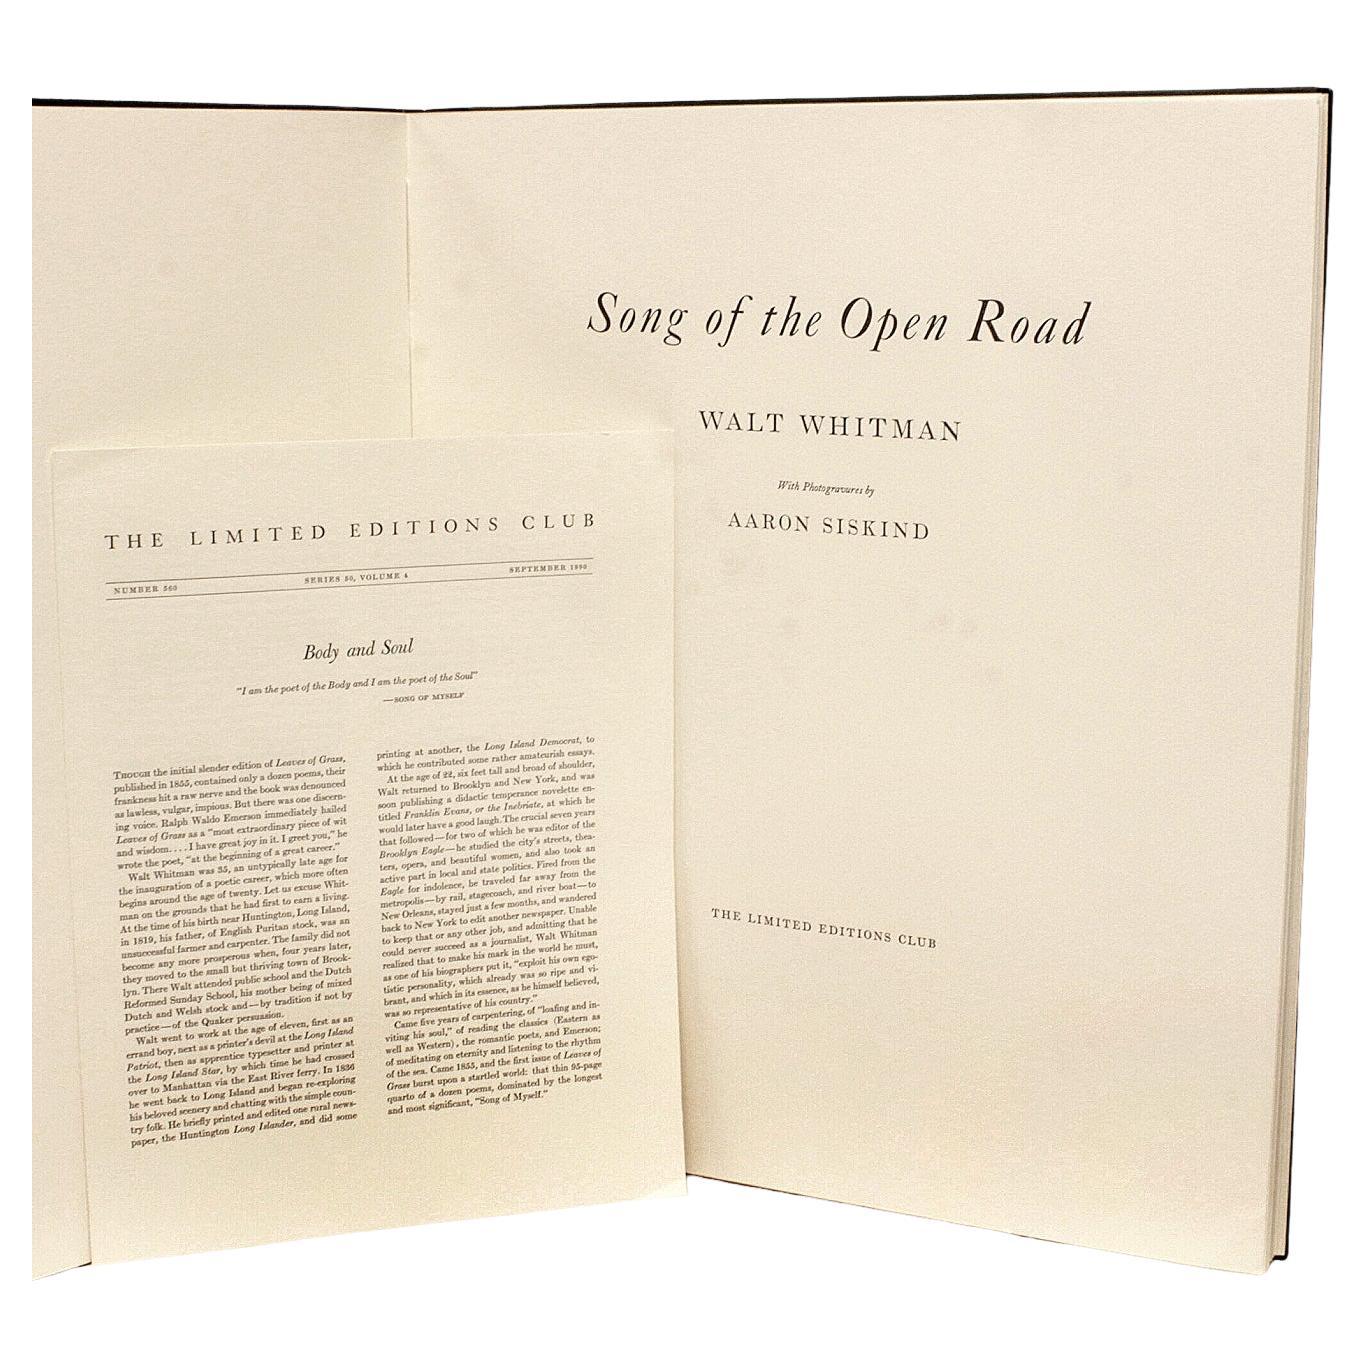 Whitman, Walt, Song of the Open Road, Limited Editions Club, Signed, 1990